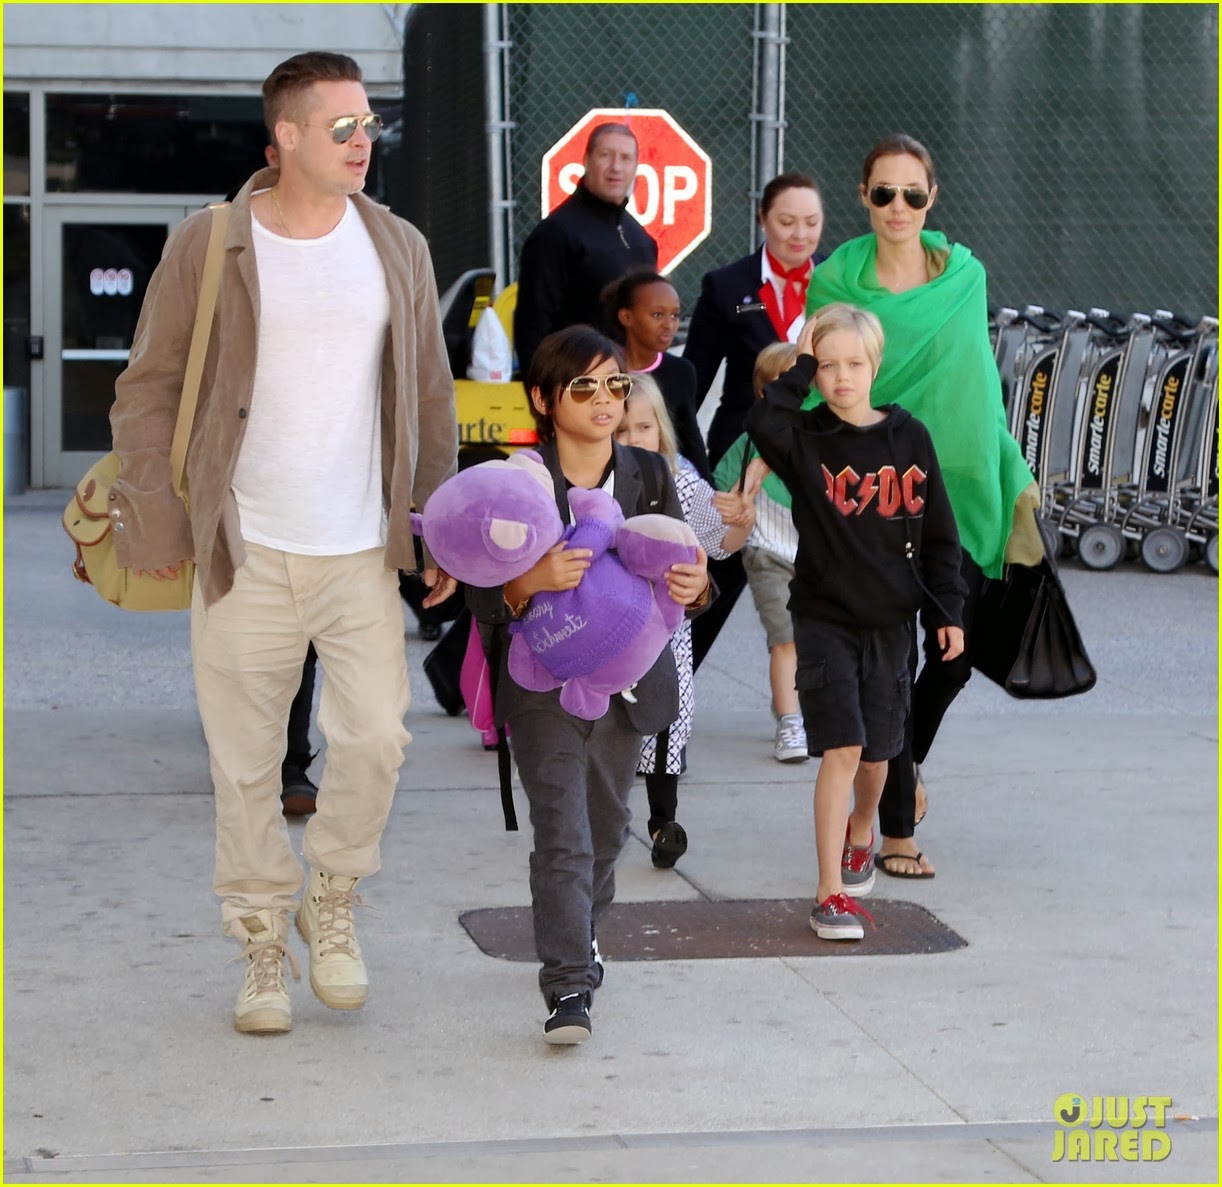 Celeb Diary: Angelina Jolie and Brad Pitt land at LAX Airport with all six of their ...1222 x 1187